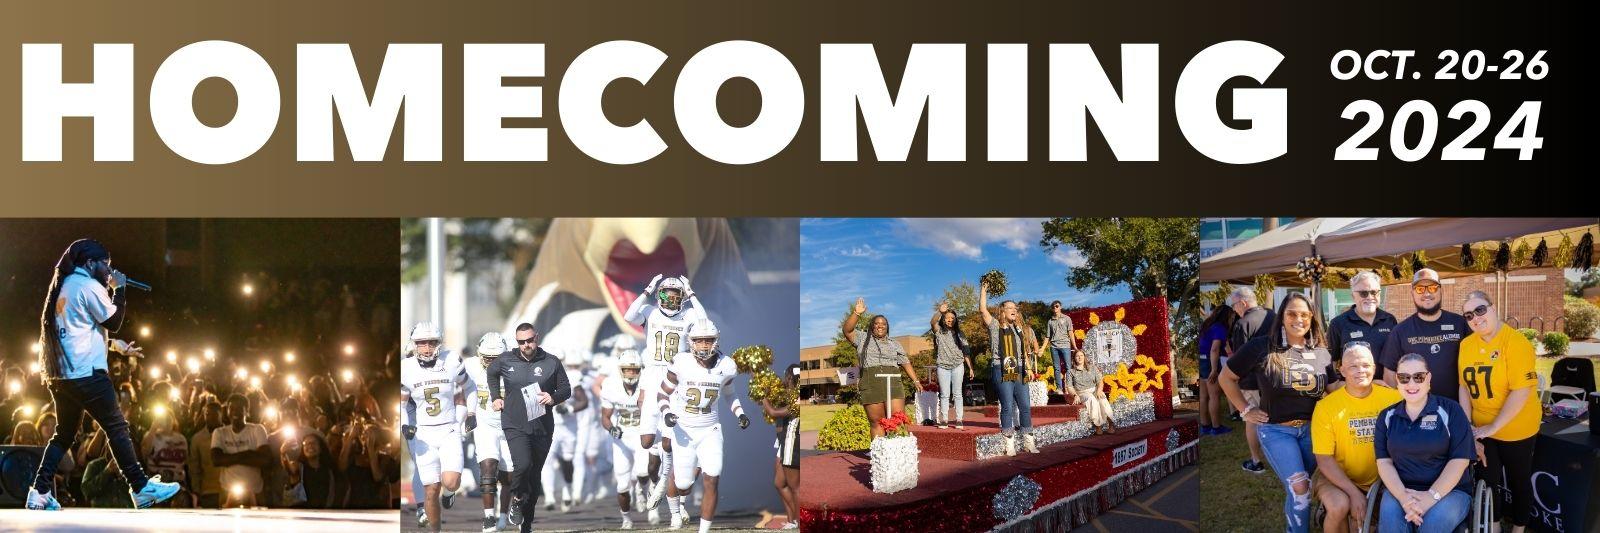 Homecoming 2024 Banner October 20-26 with pictures from the past Homecoming step show, football game, parade with the 1887 society, and tailgate at the Alumni tent.